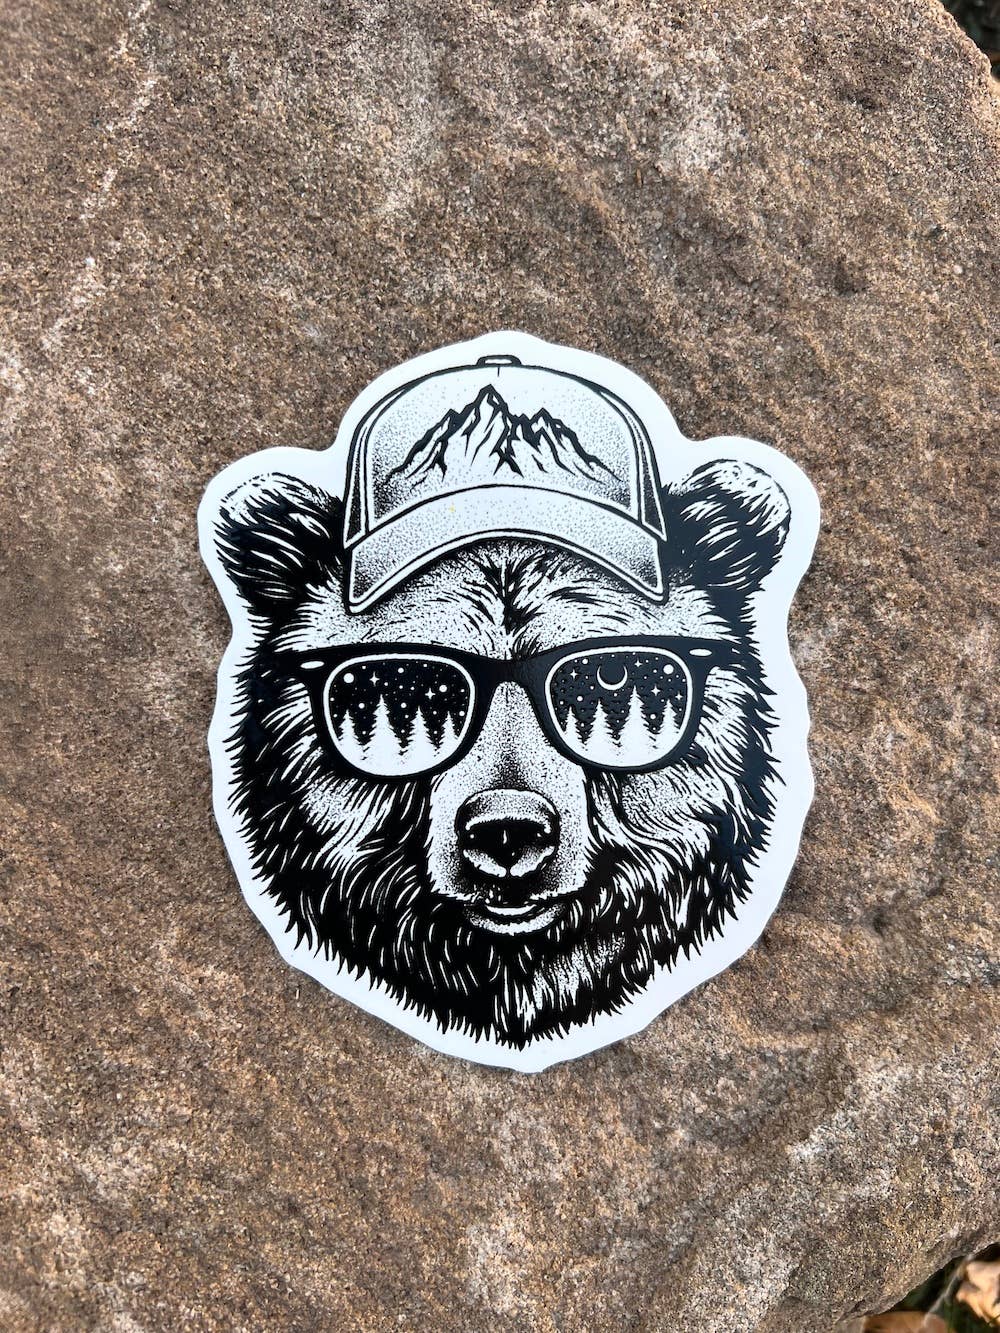 grizzle bear head sticker in black and white, he is wearing a ball cap with mountains on the front and sunglasses with trees on the lenses